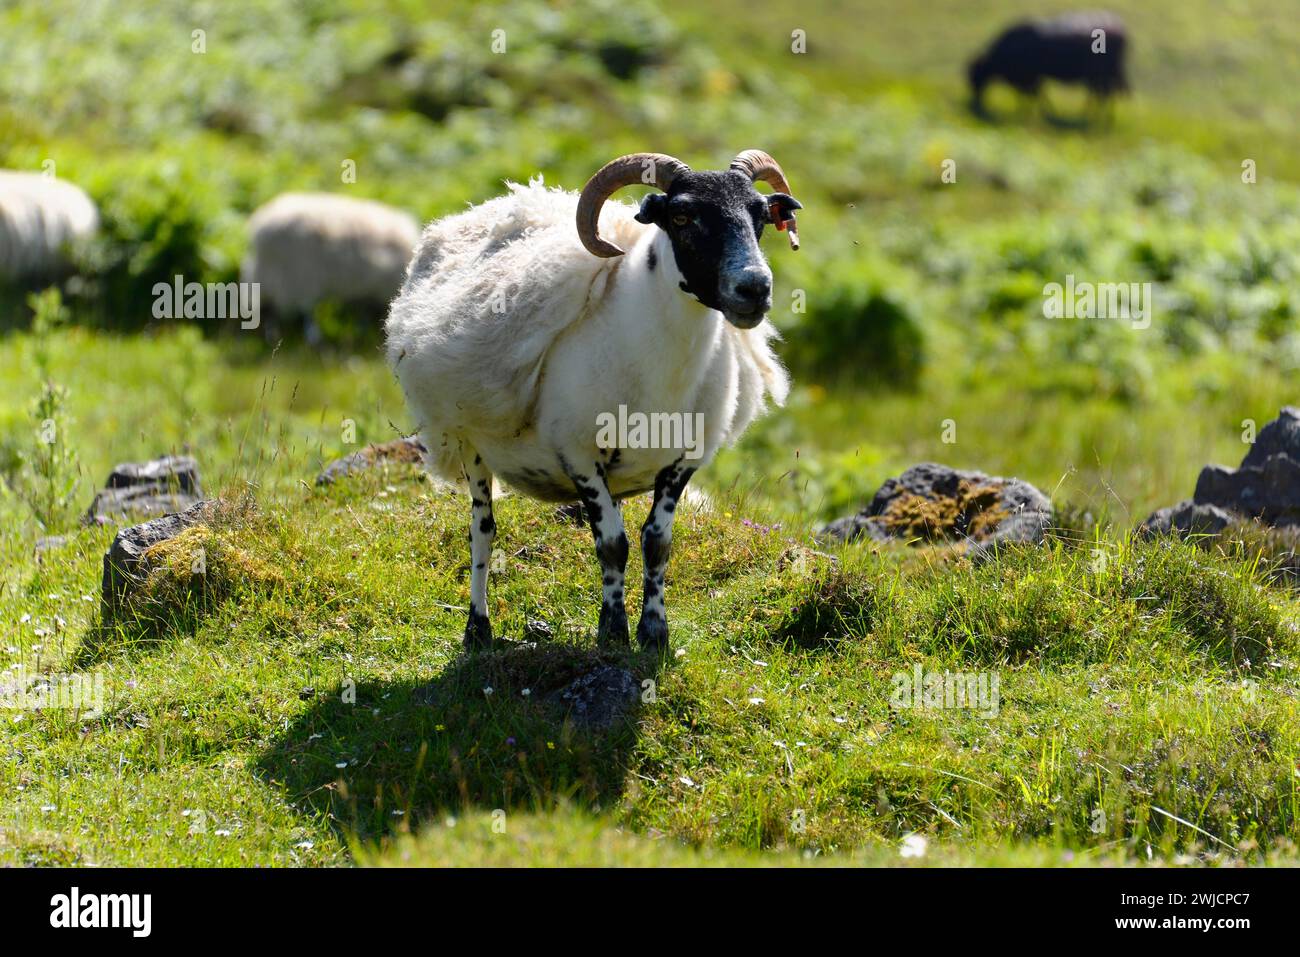 Ram domestic sheep (Ovis aries), The Quiraing, Isle of Skye, Inner Hebrides, Highlands and Islands, Scotland, Great Britain Stock Photo